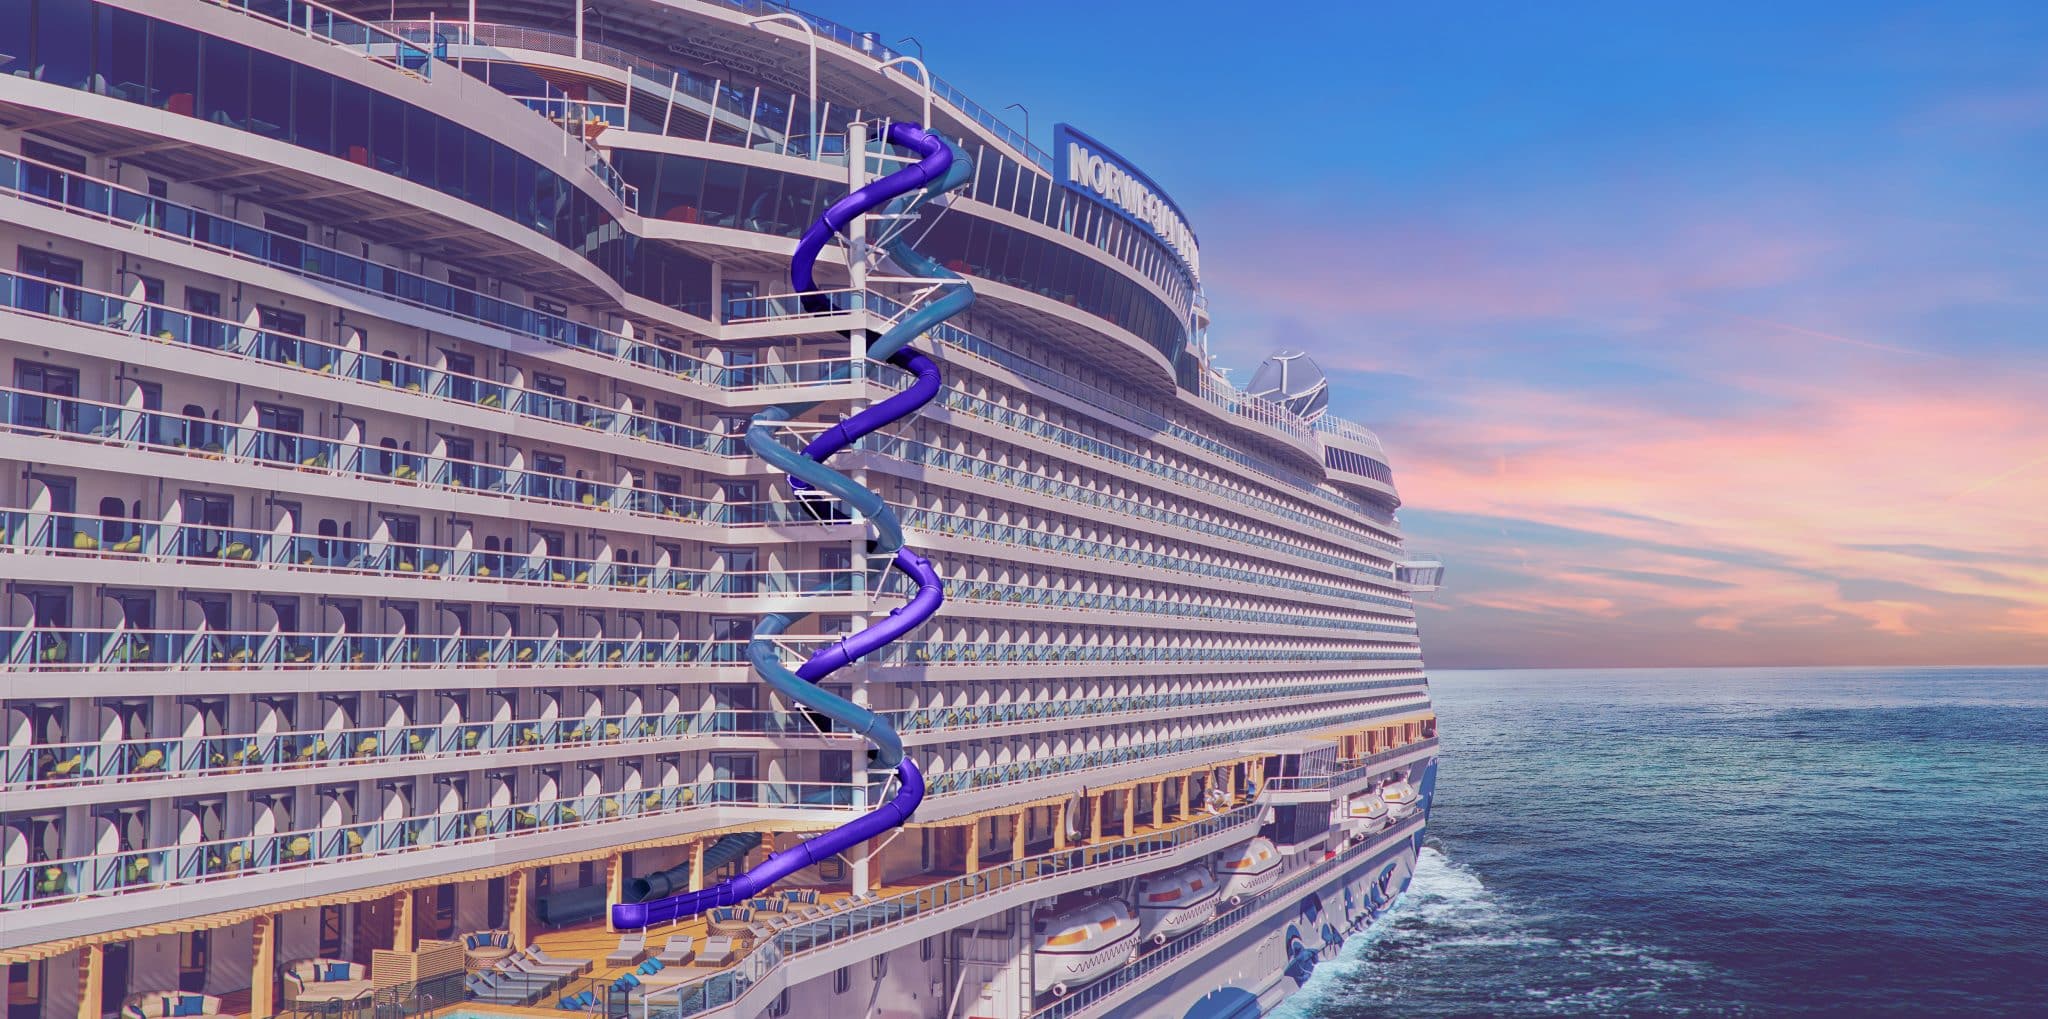 norwegian cruise line excursions included